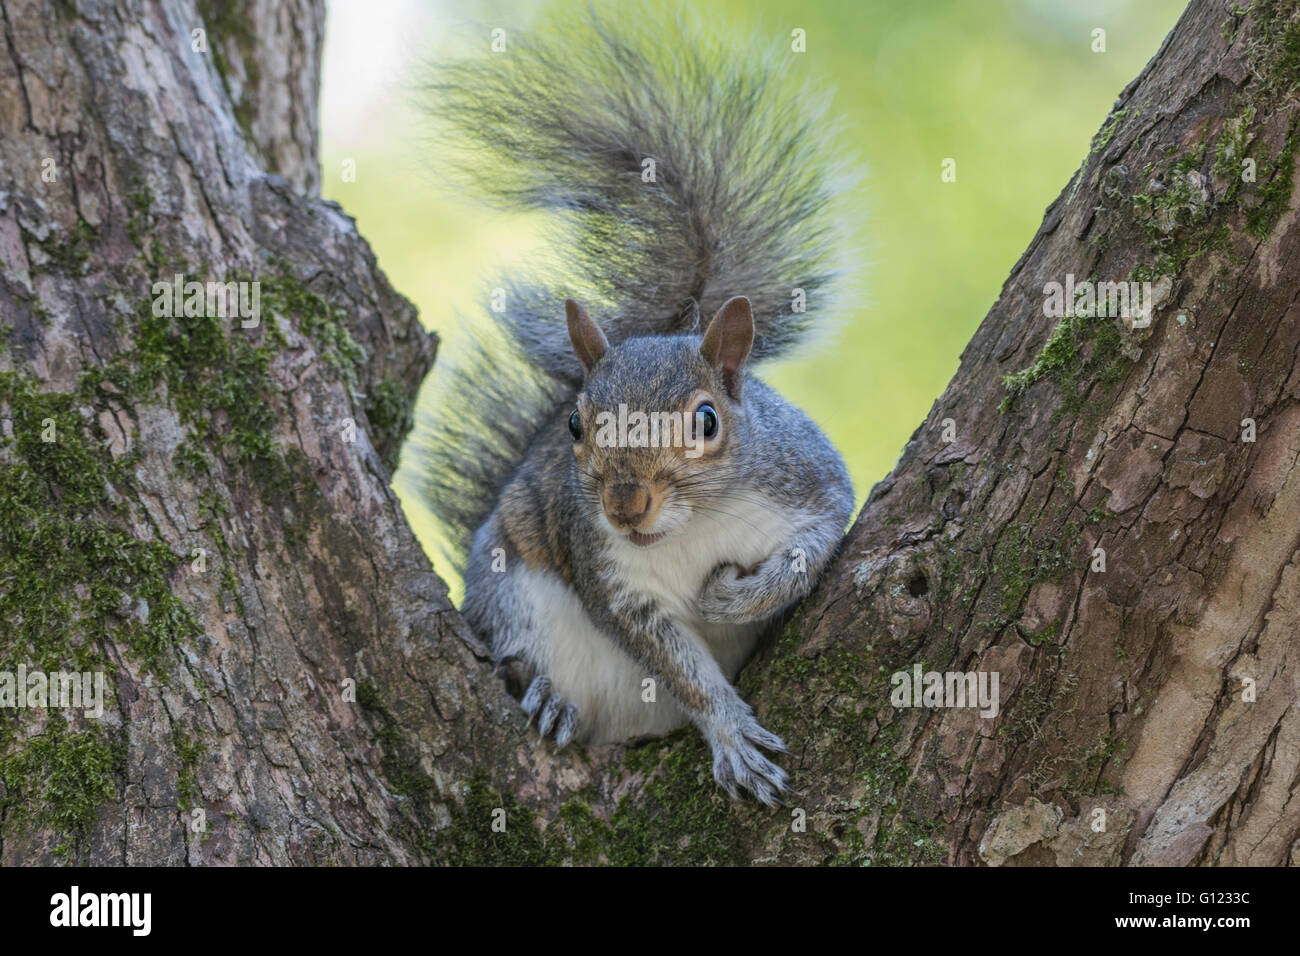 Gray squirrel sitting in between tree branches Stock Photo